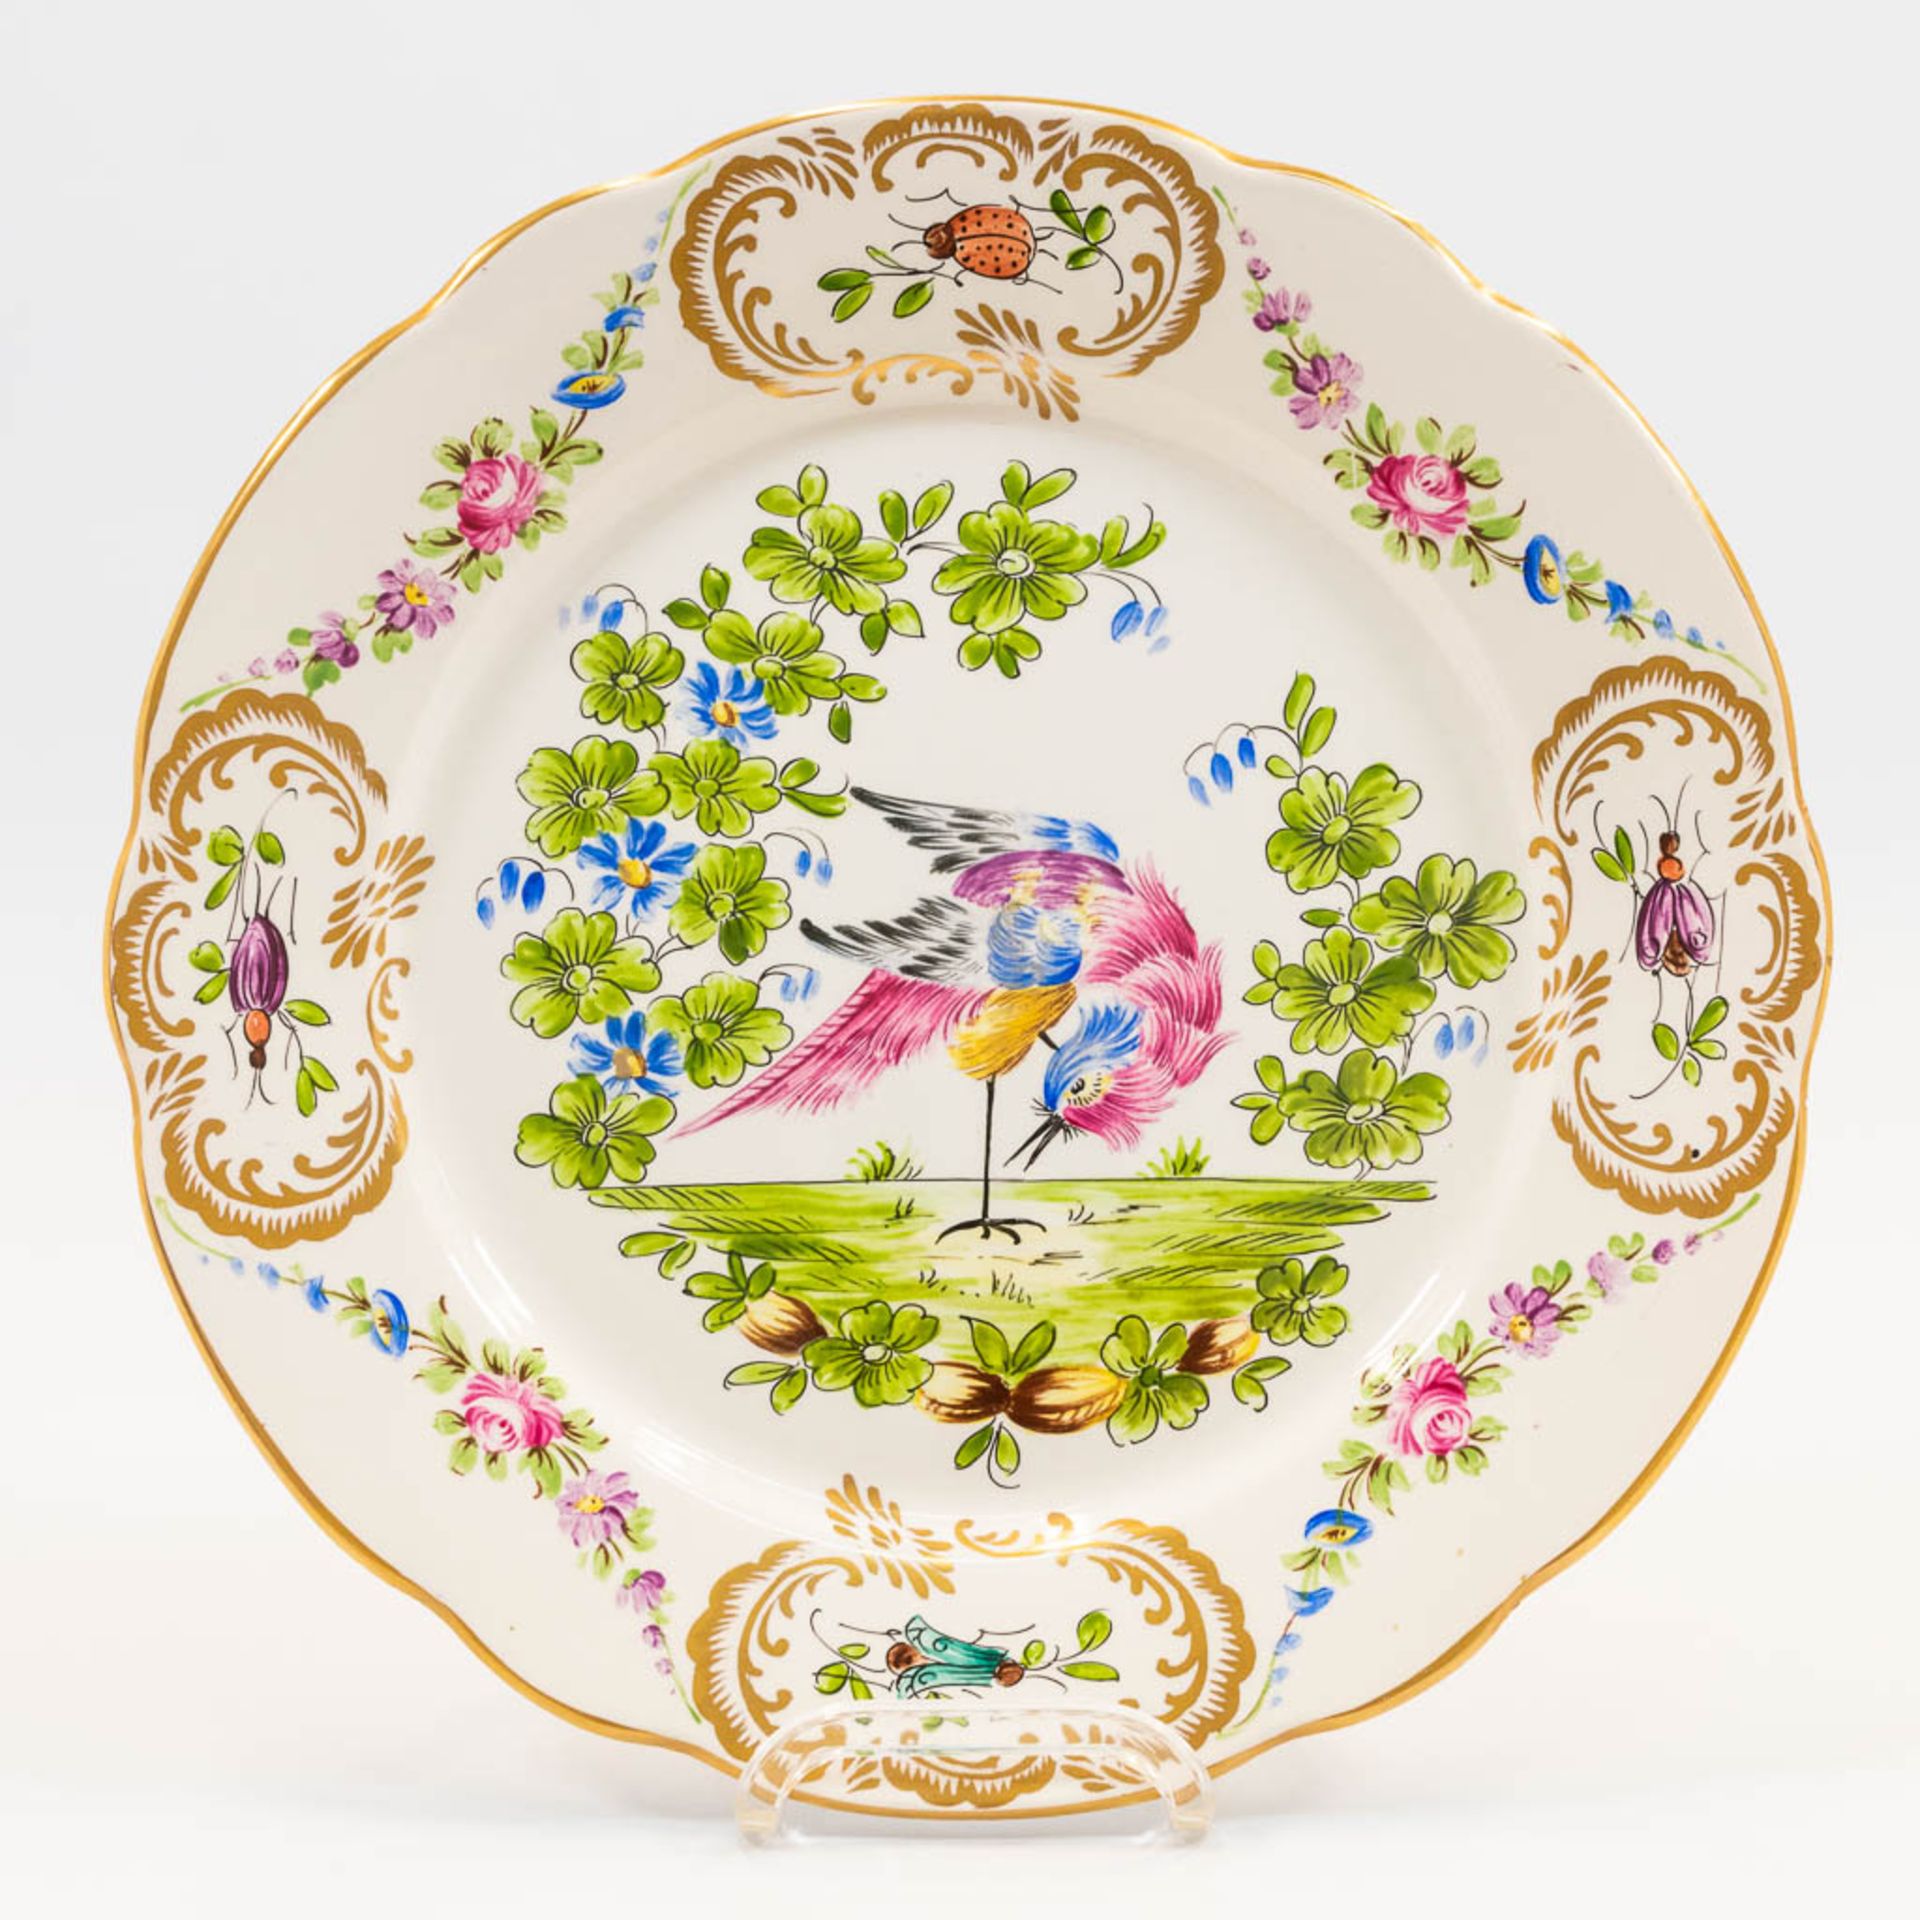 A collection of 2 pairs of faience display plates with hand-painted decor and made in Clamecy, Franc - Image 8 of 17